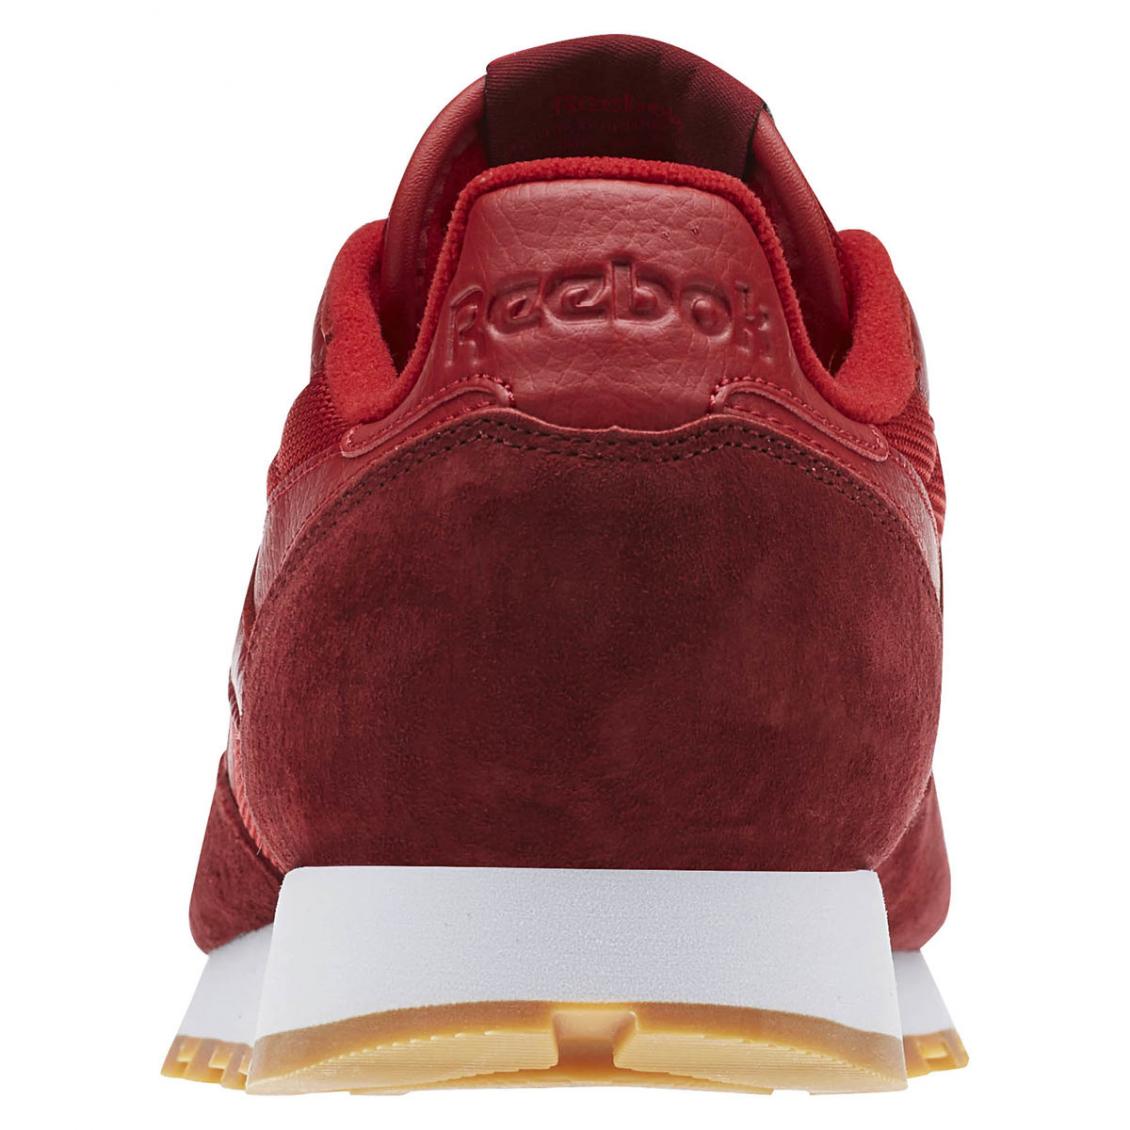 Red – Reebok Classic Leather Perfect Split Pack Mens Flash Red / Merlot / White / Gum